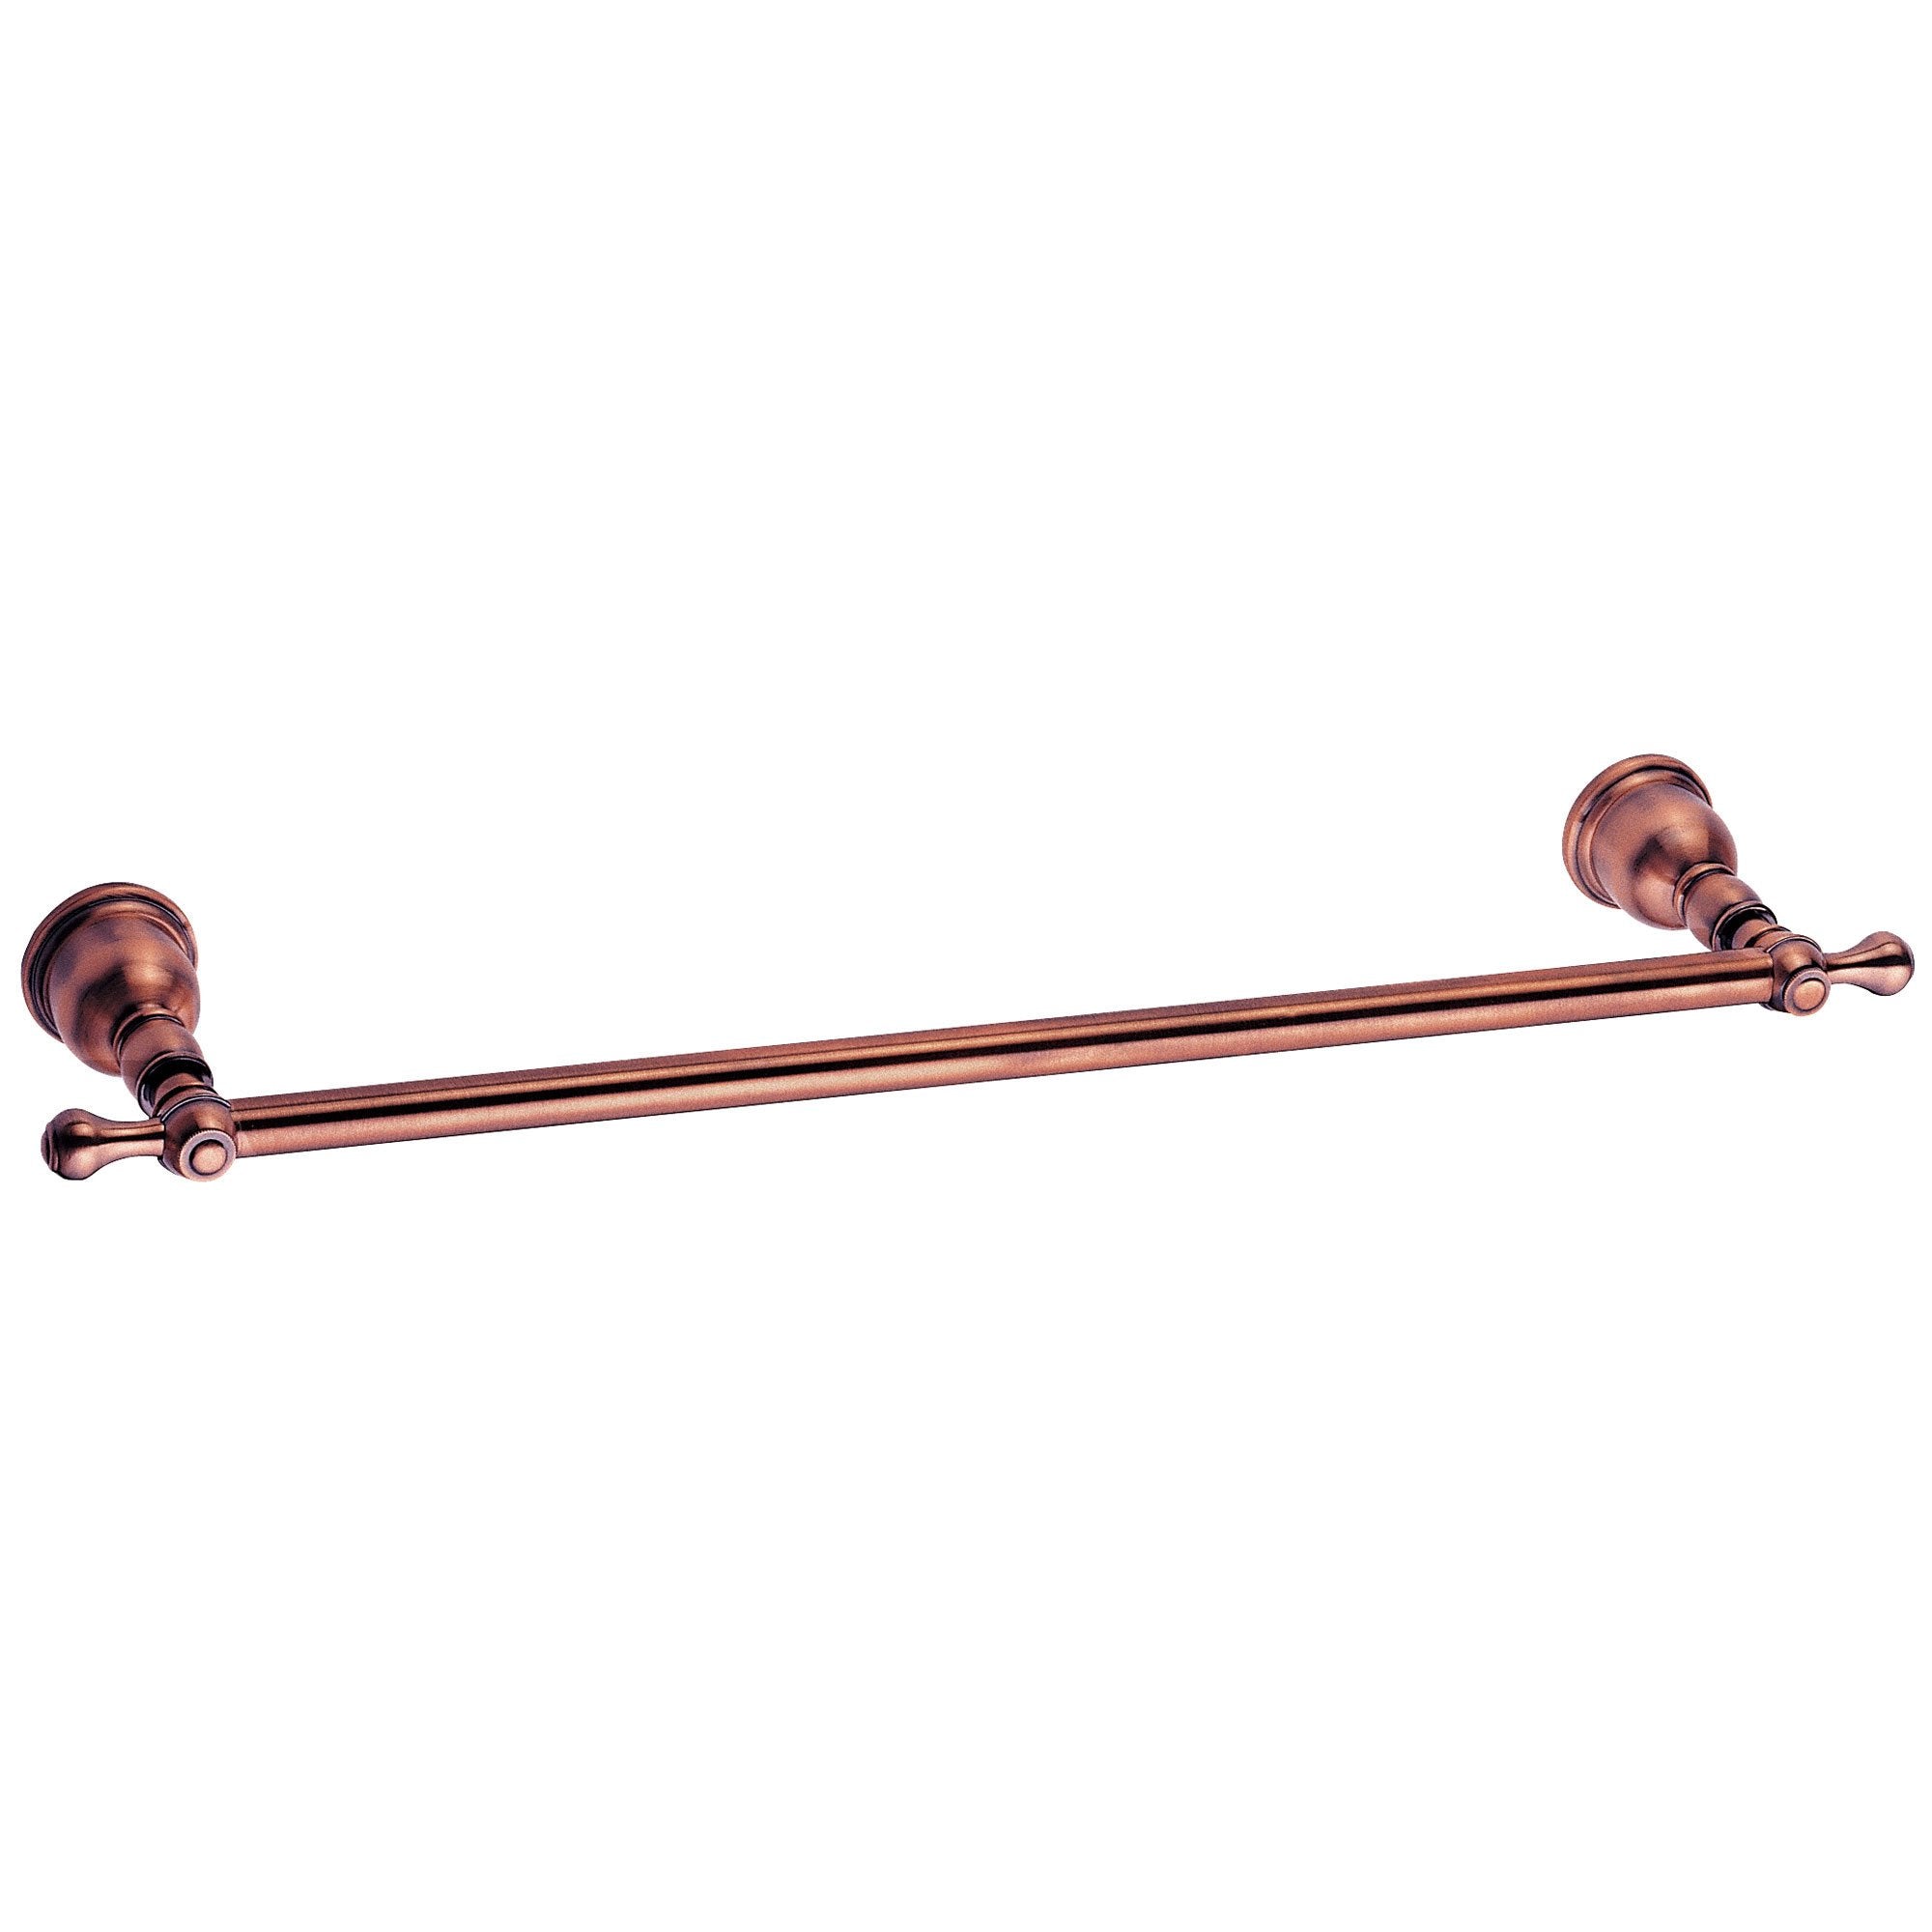 Danze Opulence Traditional Style Towel Bars Antique Copper 18" Towel Bar